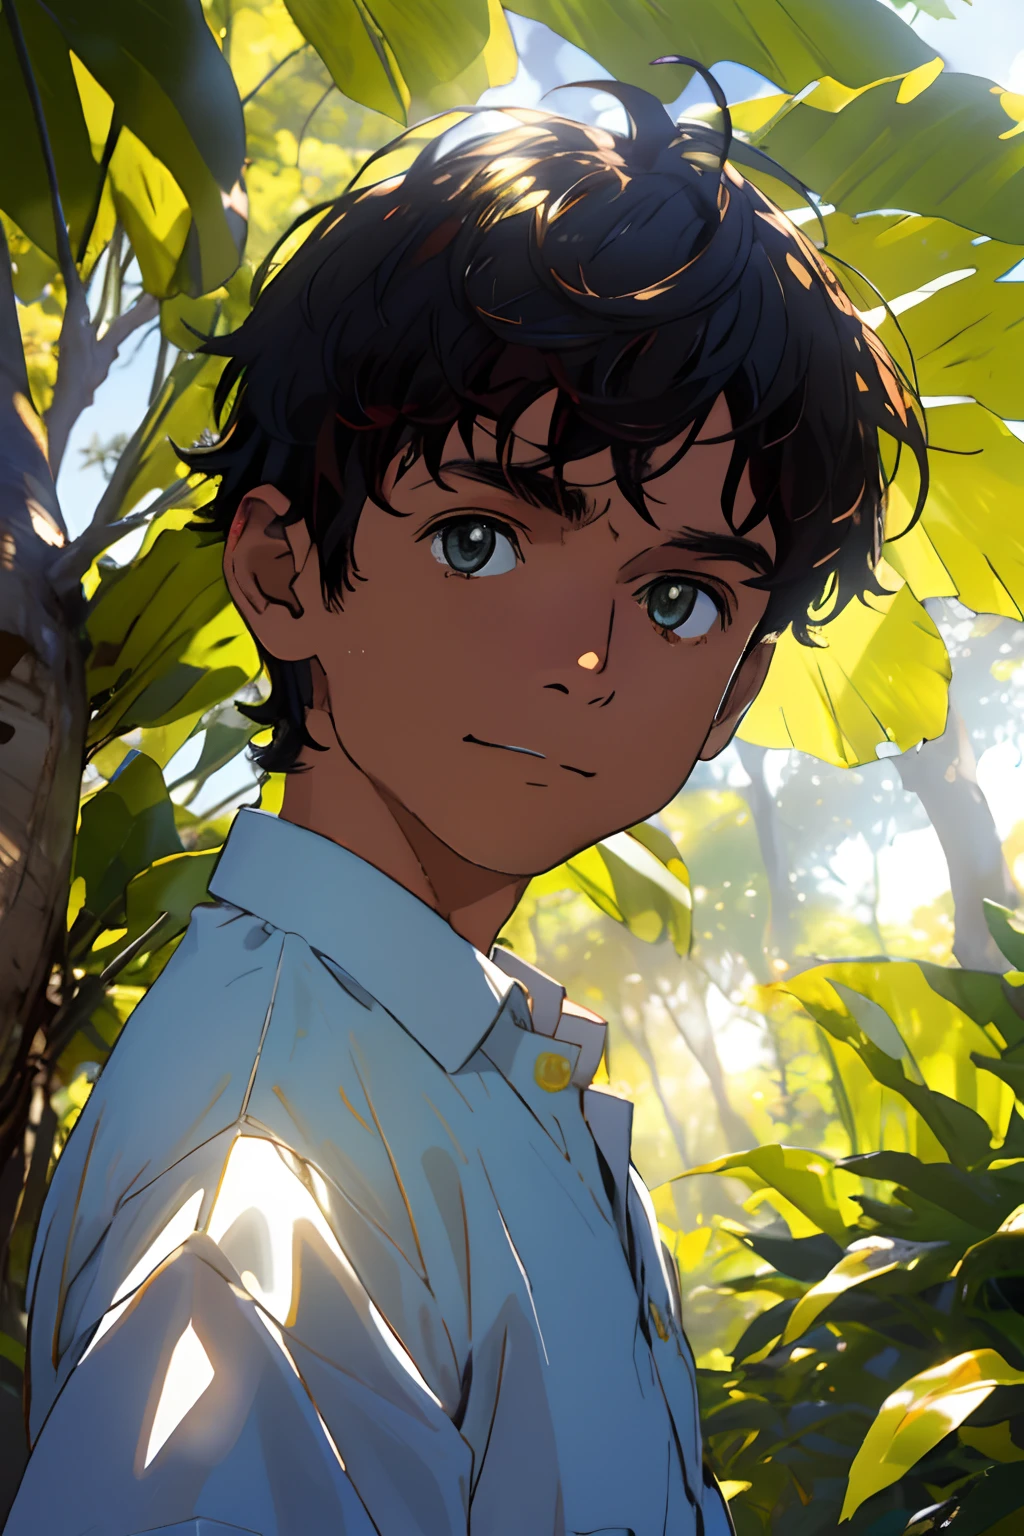 A boy in the forest with sunlight on his face